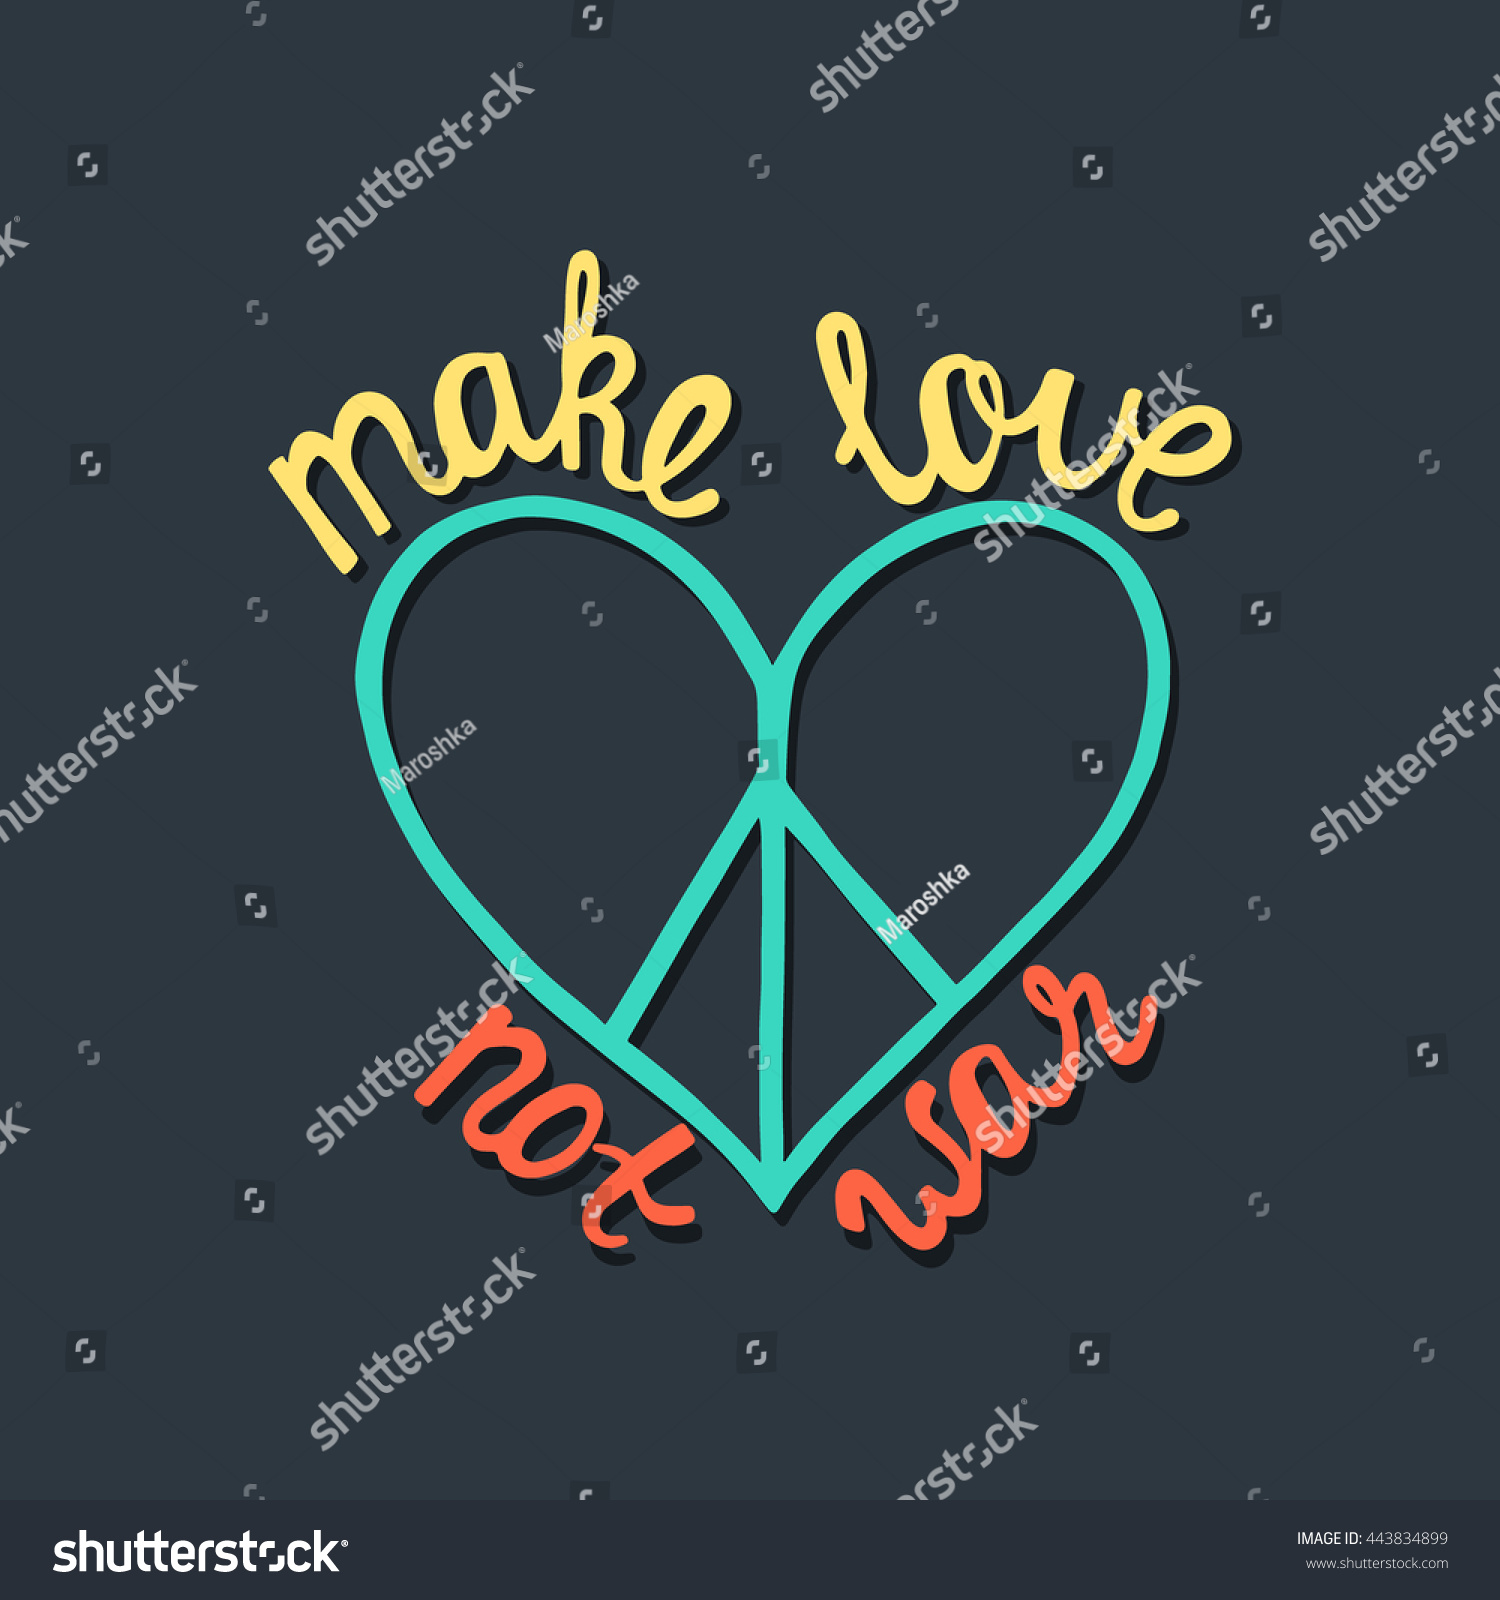 Make Love Not War Inspirational Quote Stock Vector Royalty Free